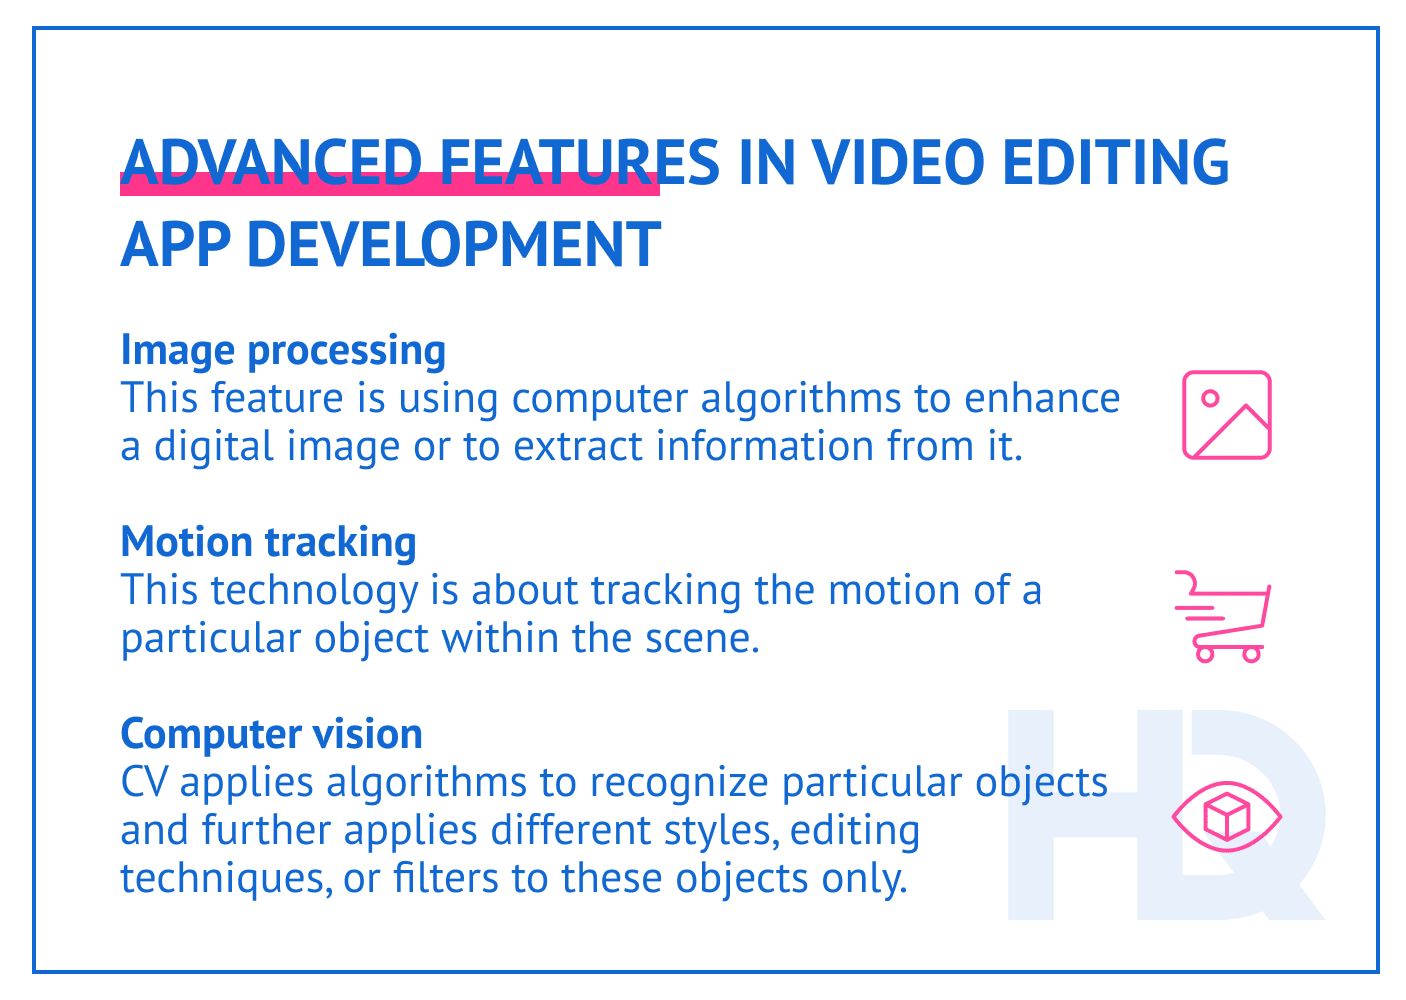 Advanced features in video editing app development.